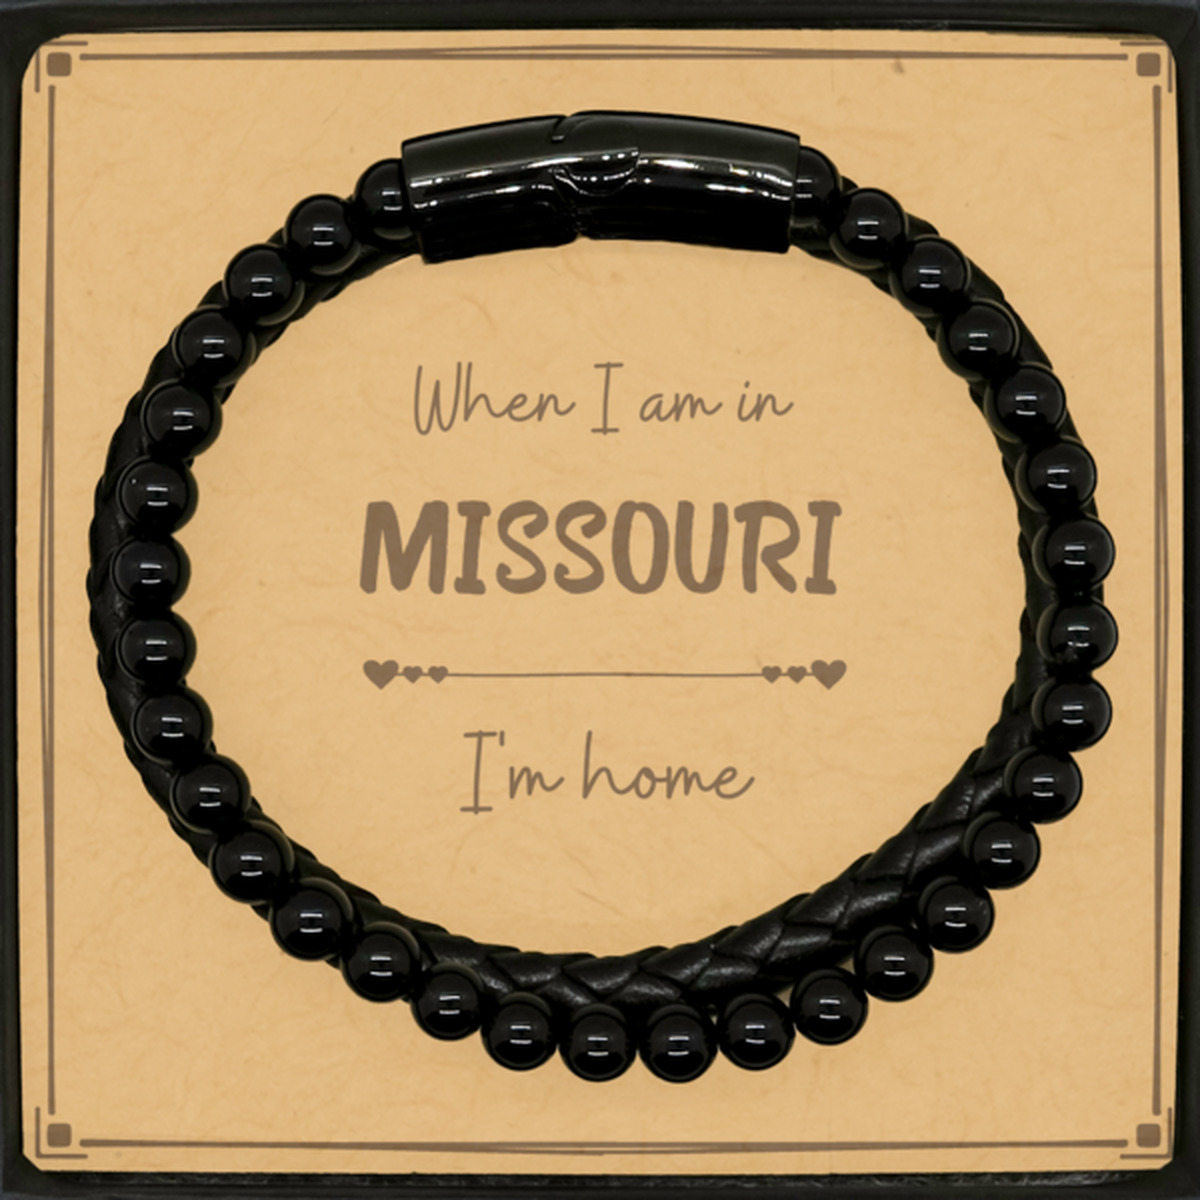 When I am in Missouri I'm home Stone Leather Bracelets, Message Card Gifts For Missouri, State Missouri Birthday Gifts for Friends Coworker